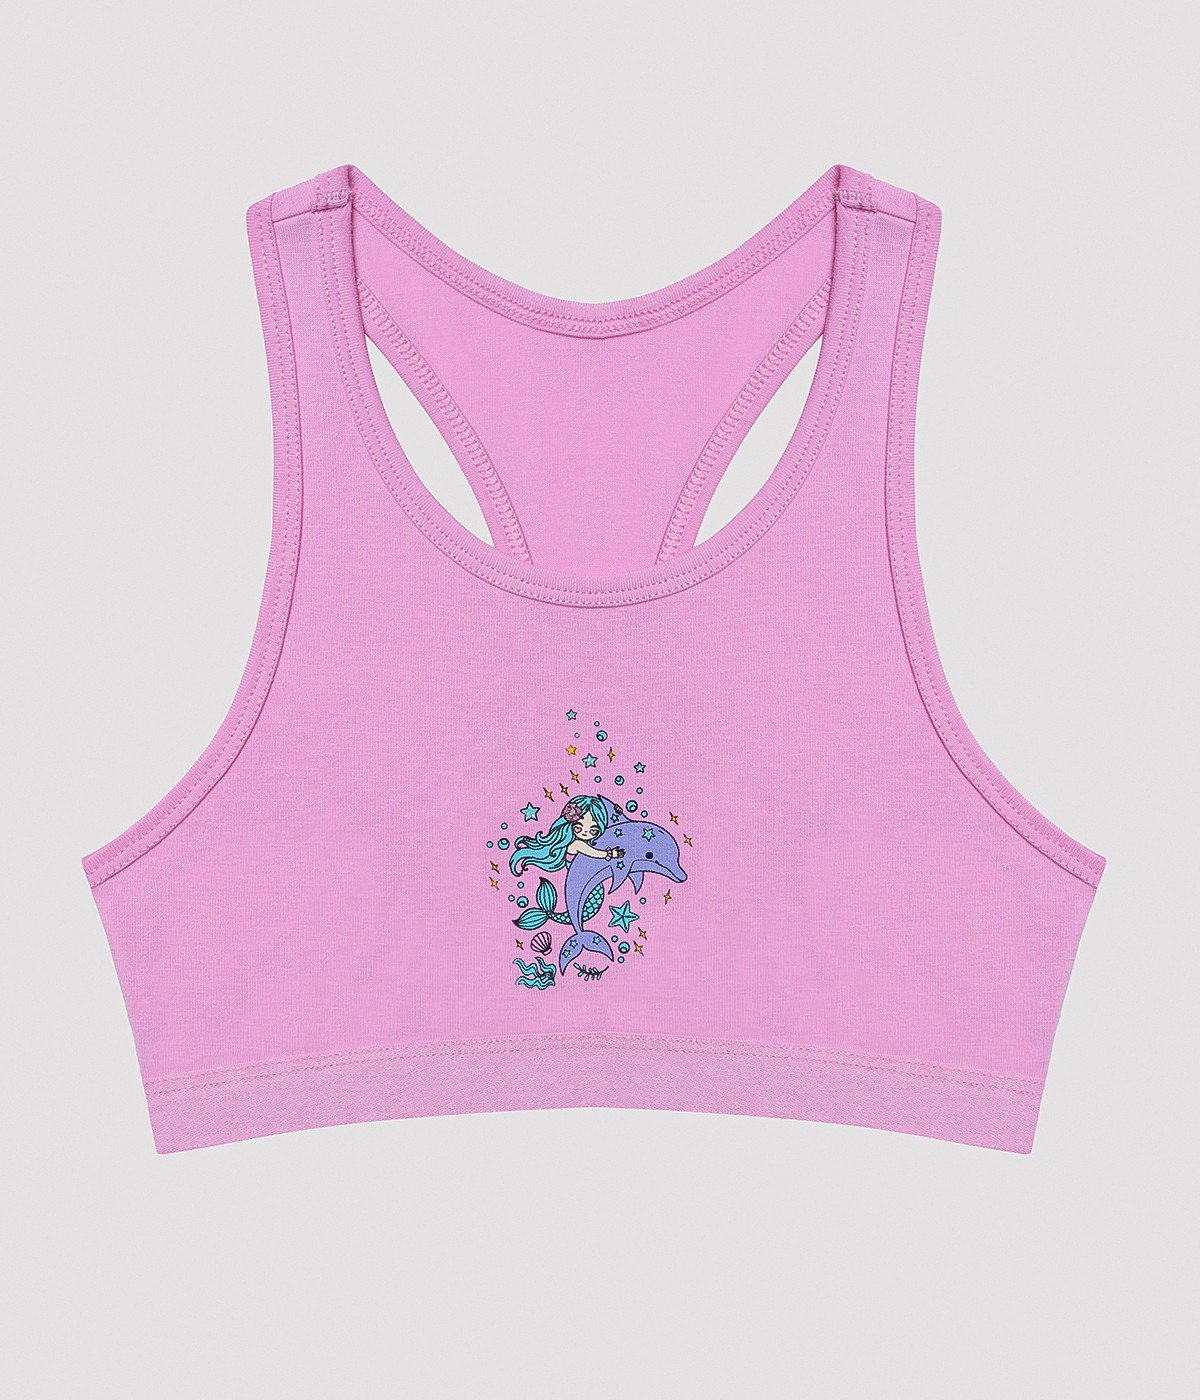 Girls Colorful Mermaid Detailed 2in1 Sports Top